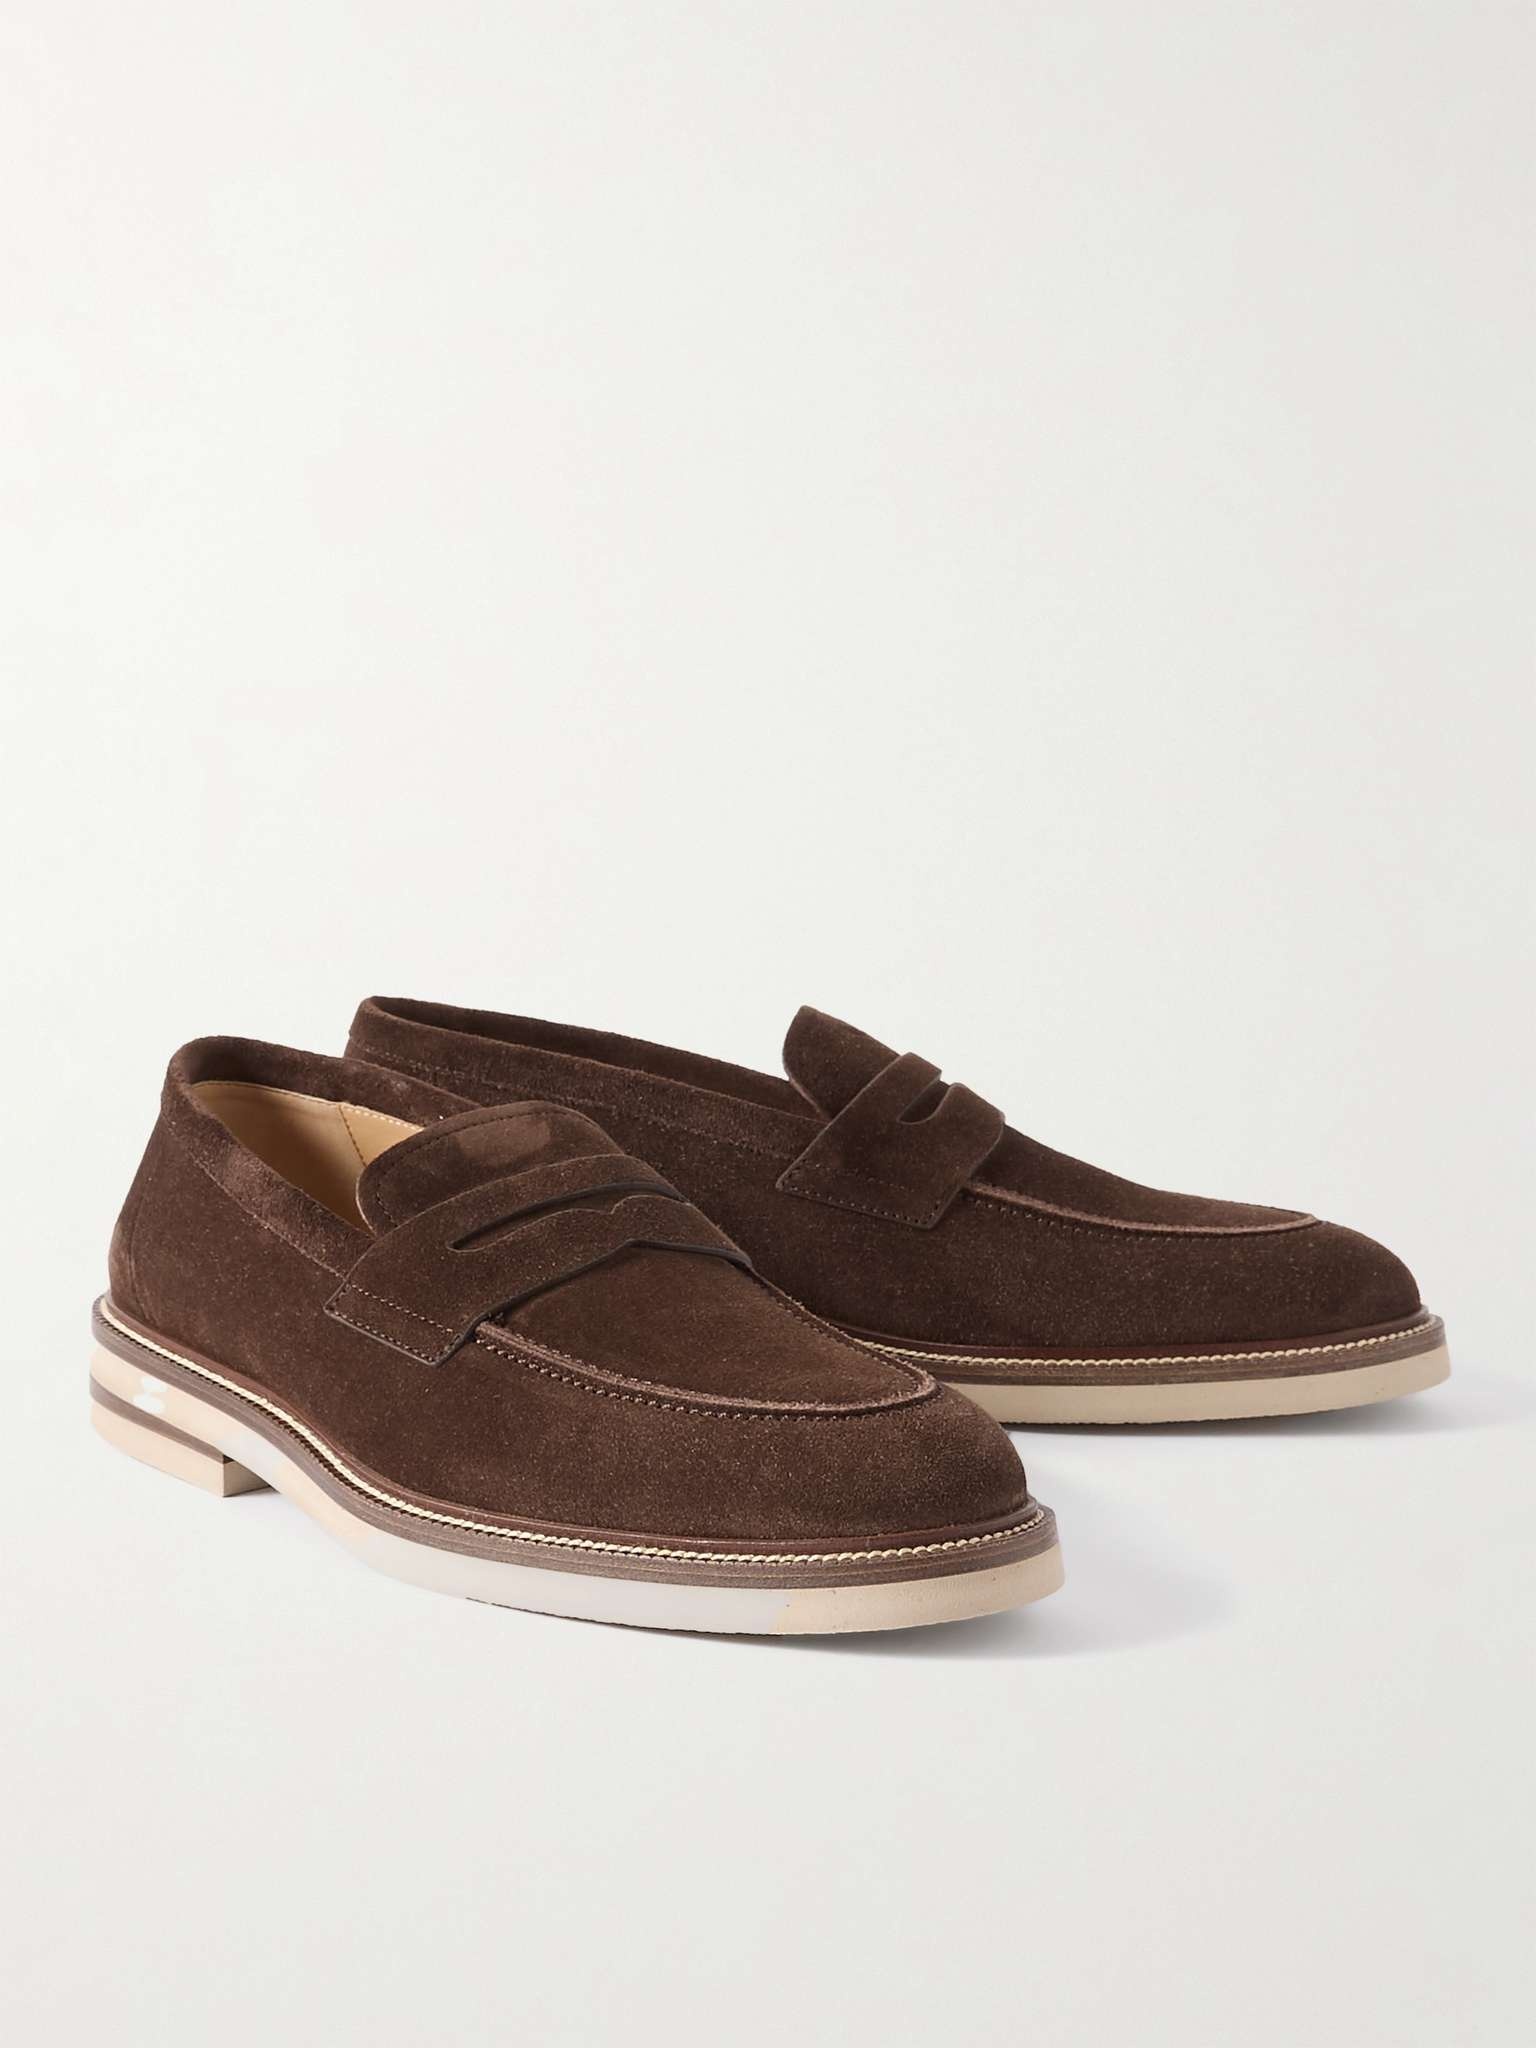 Suede Penny Loafers - 4